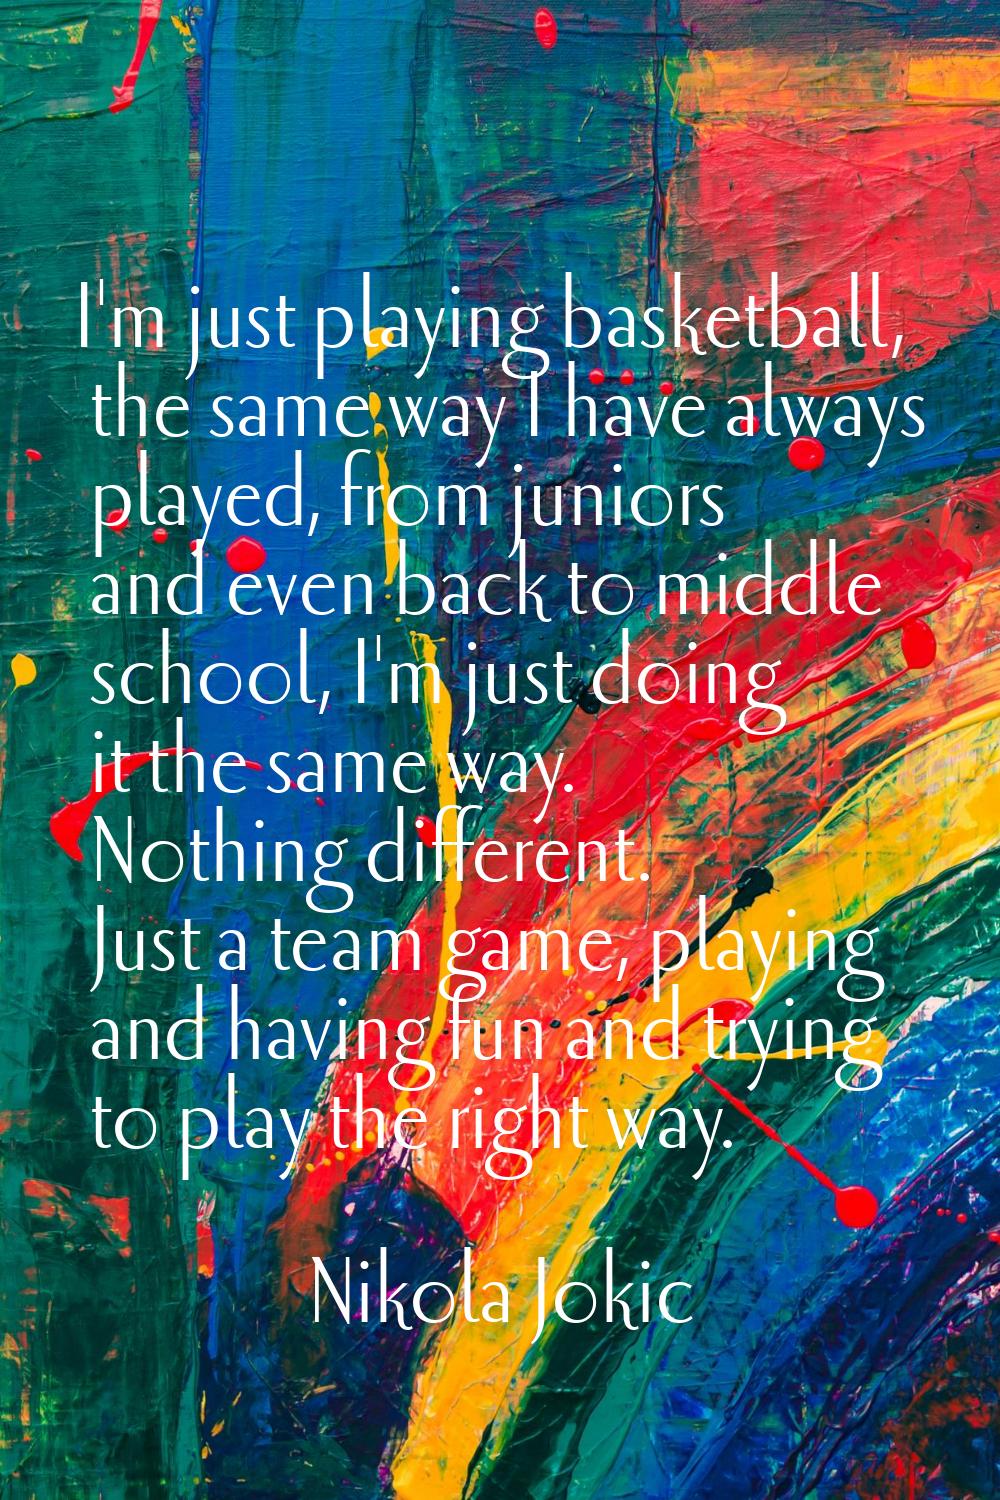 I'm just playing basketball, the same way I have always played, from juniors and even back to middl